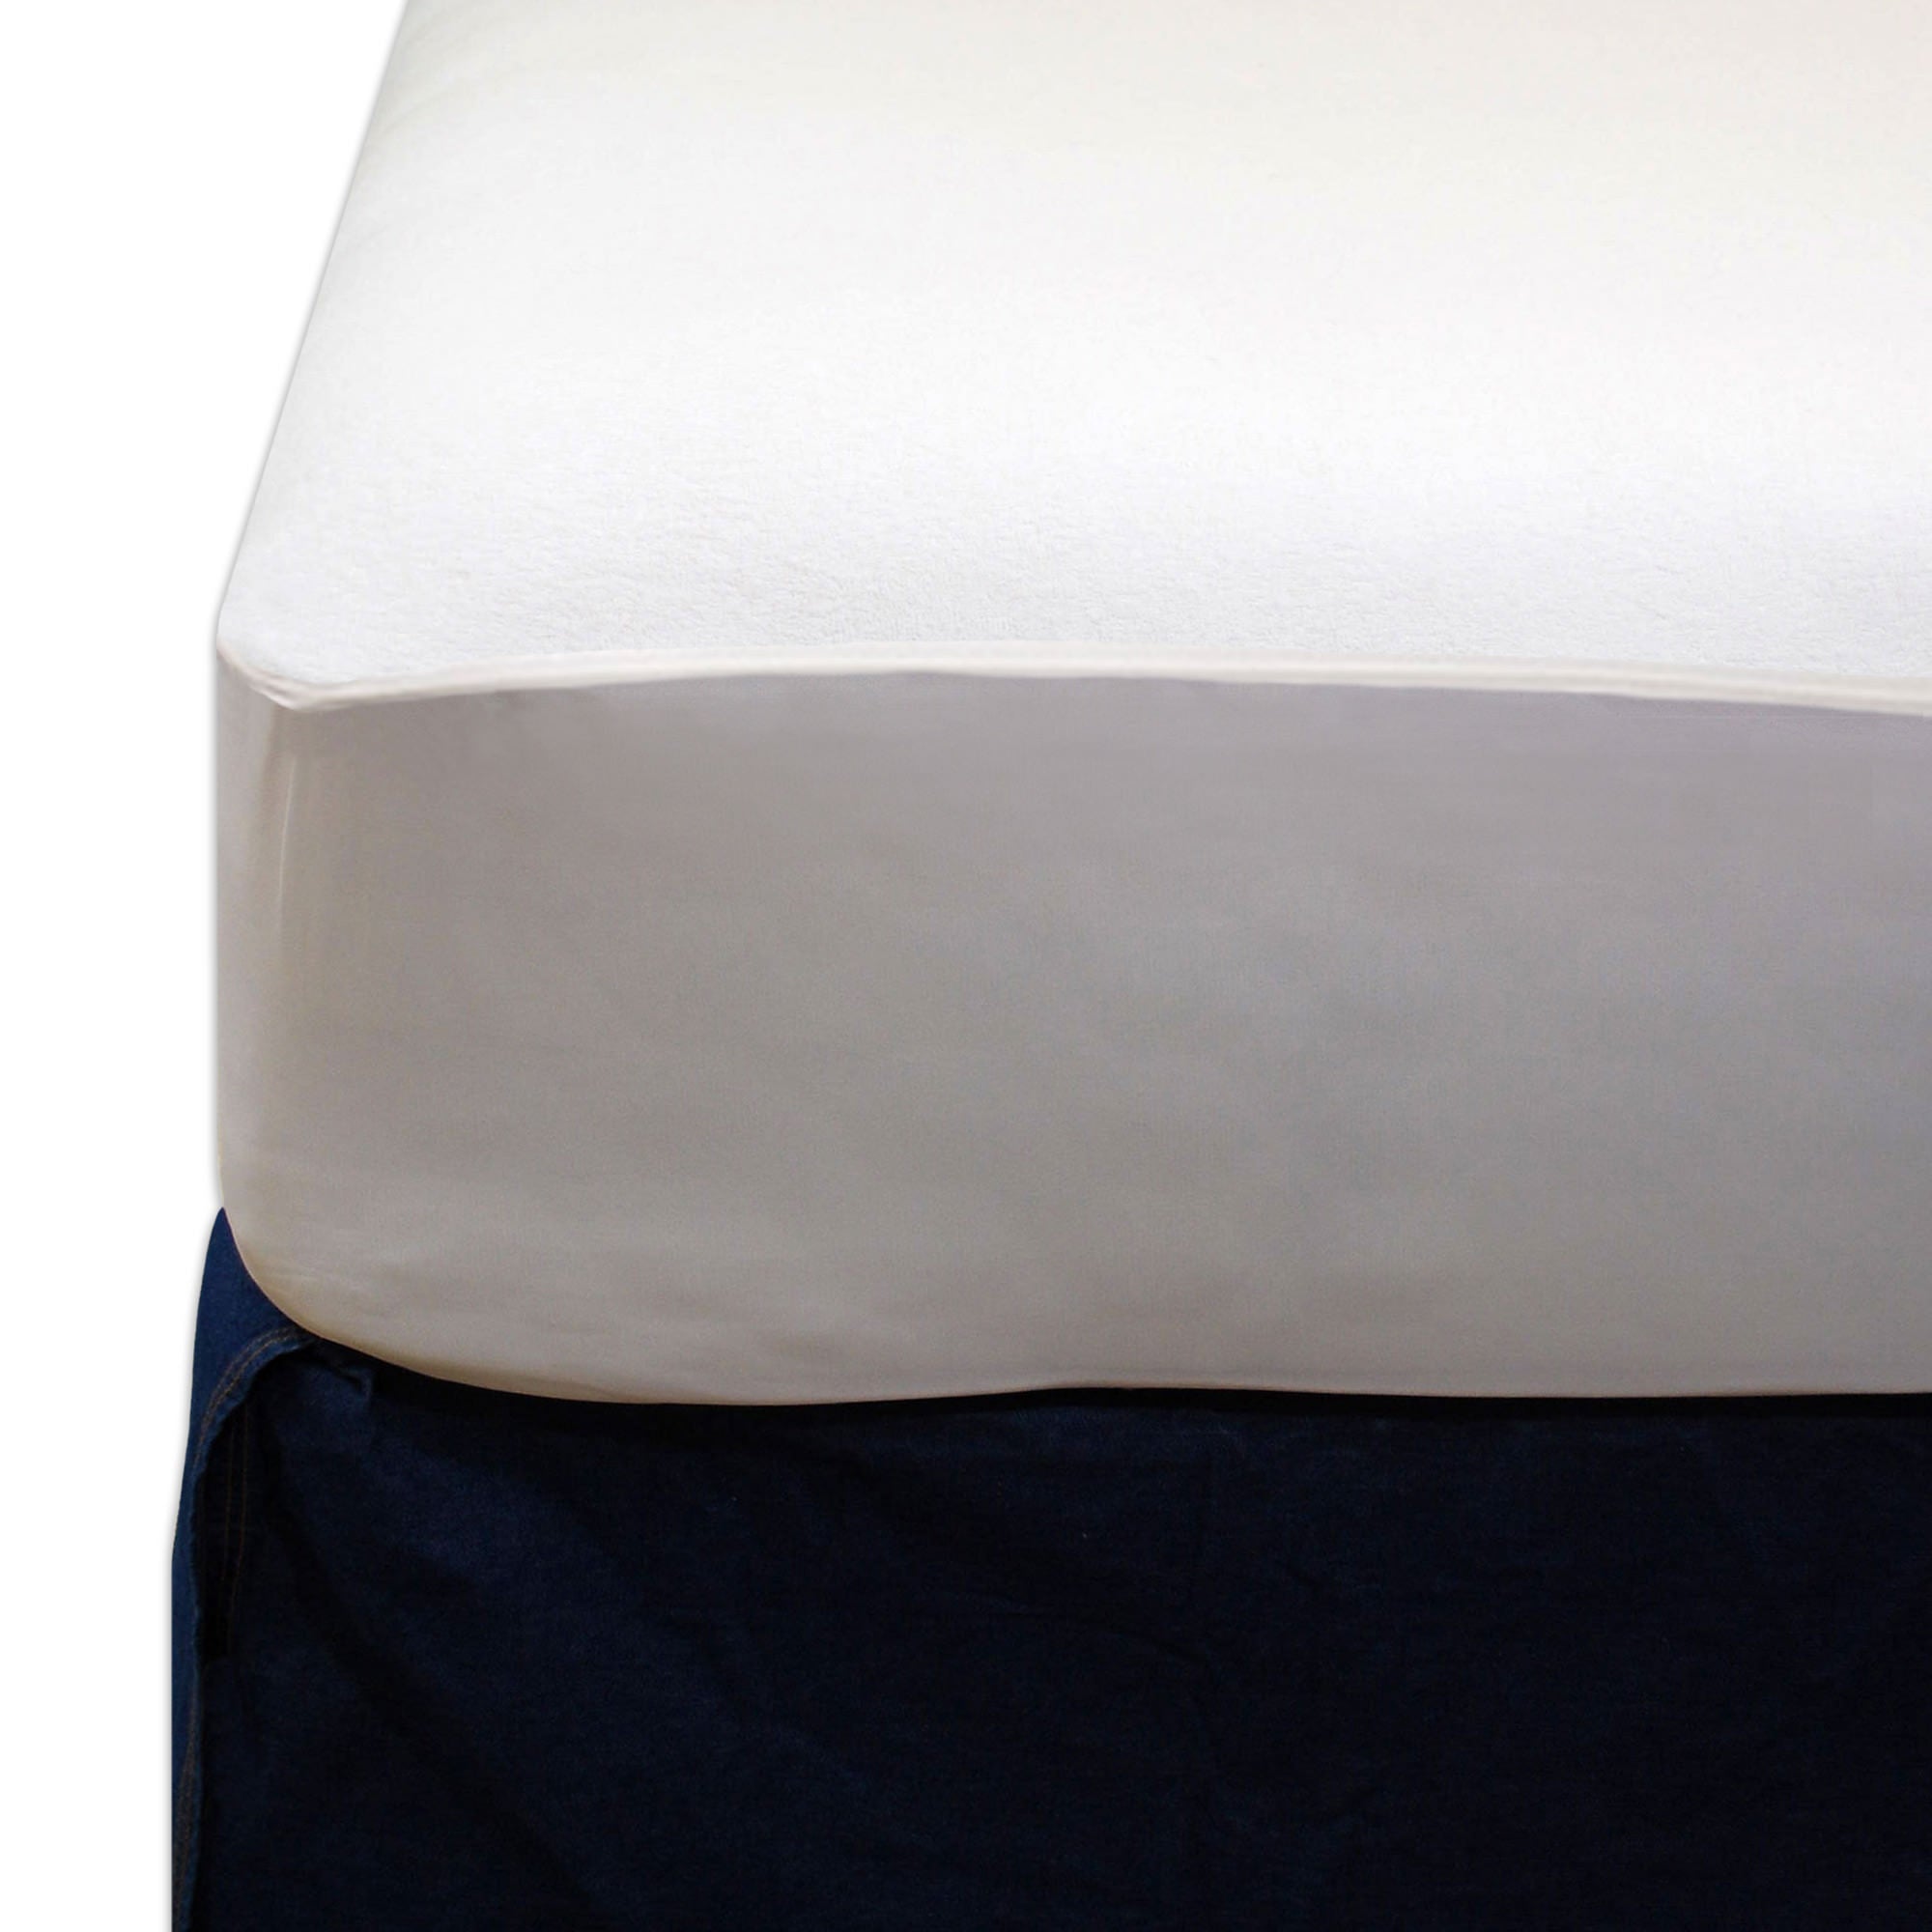 Breathable, Waterproof Mattress Protector (Zippered) - Full Size (9-15 inch depth)